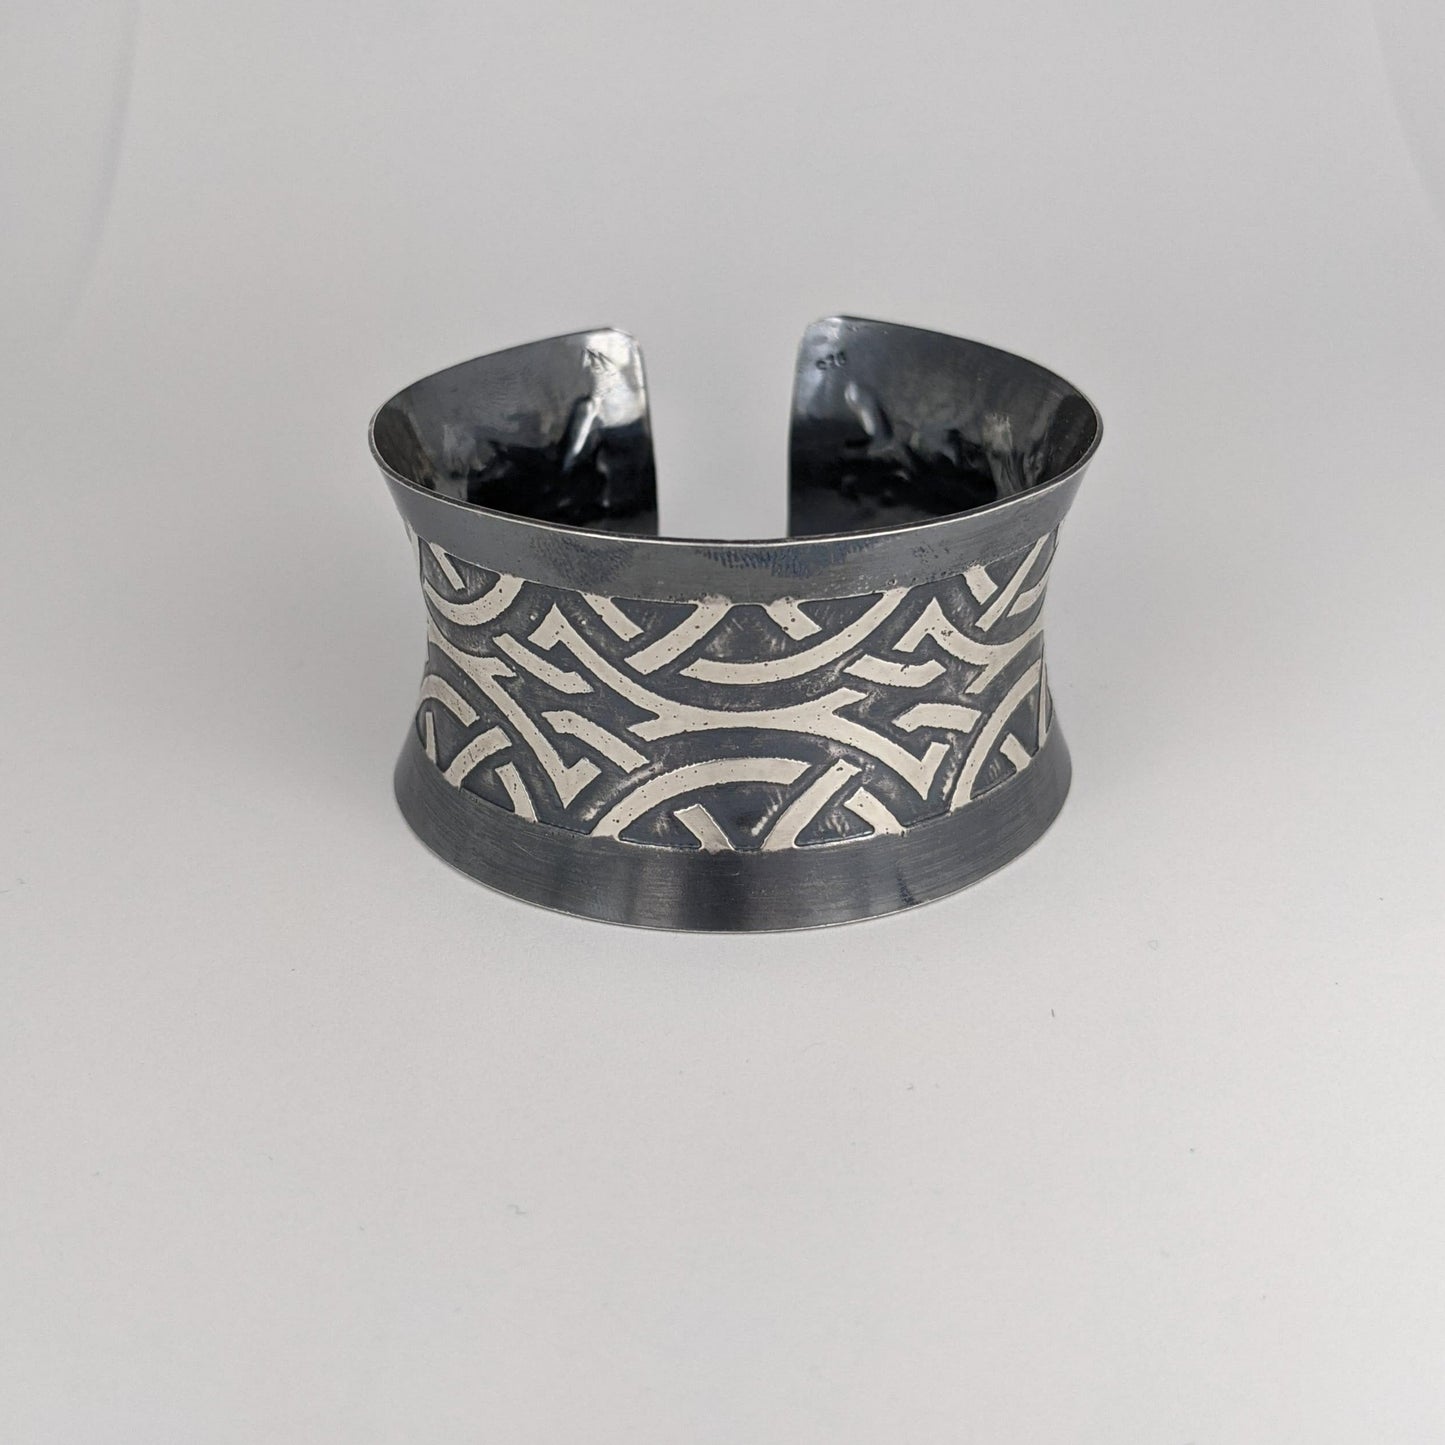 C148.32bs Wide Sterling Silver Cuffs, 92.5 SS, hand-formed, Art Deco etching & Black Pearl patina